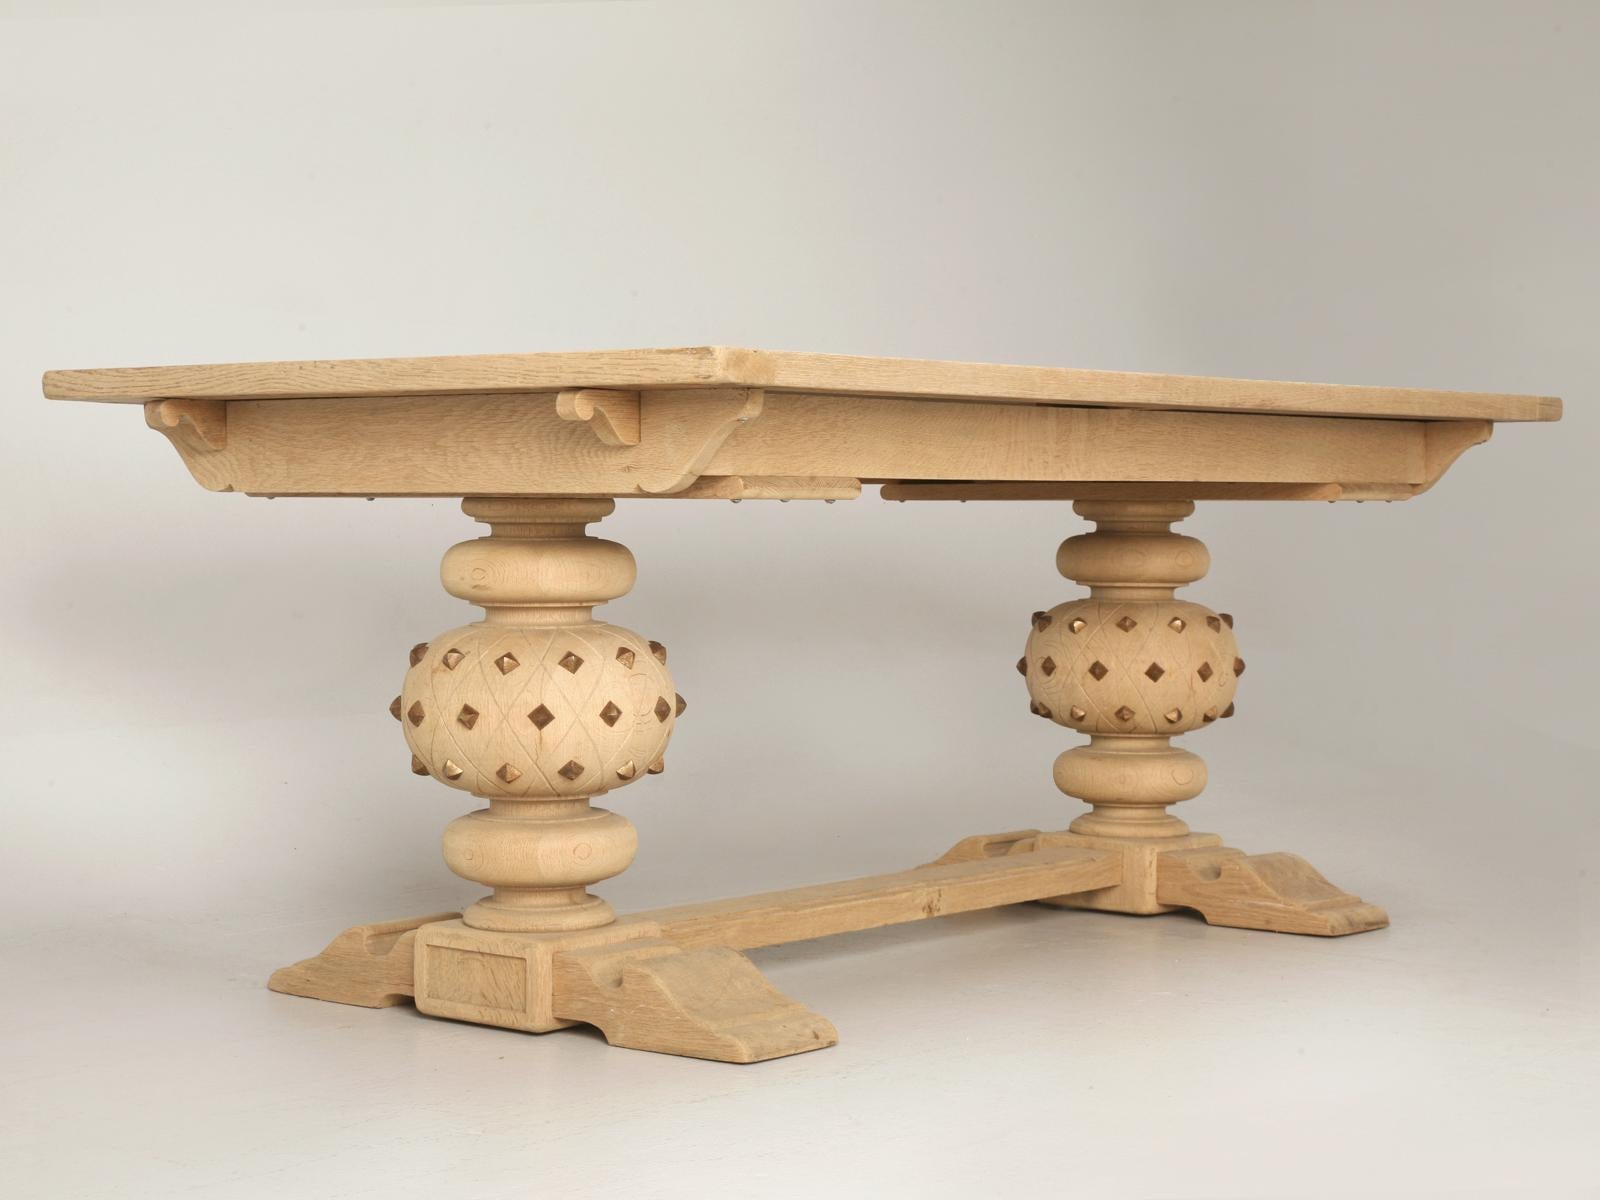 Louis XV Unusual Rare Studded Vintage French White Oak Trestle Table with Leaves Seats 10